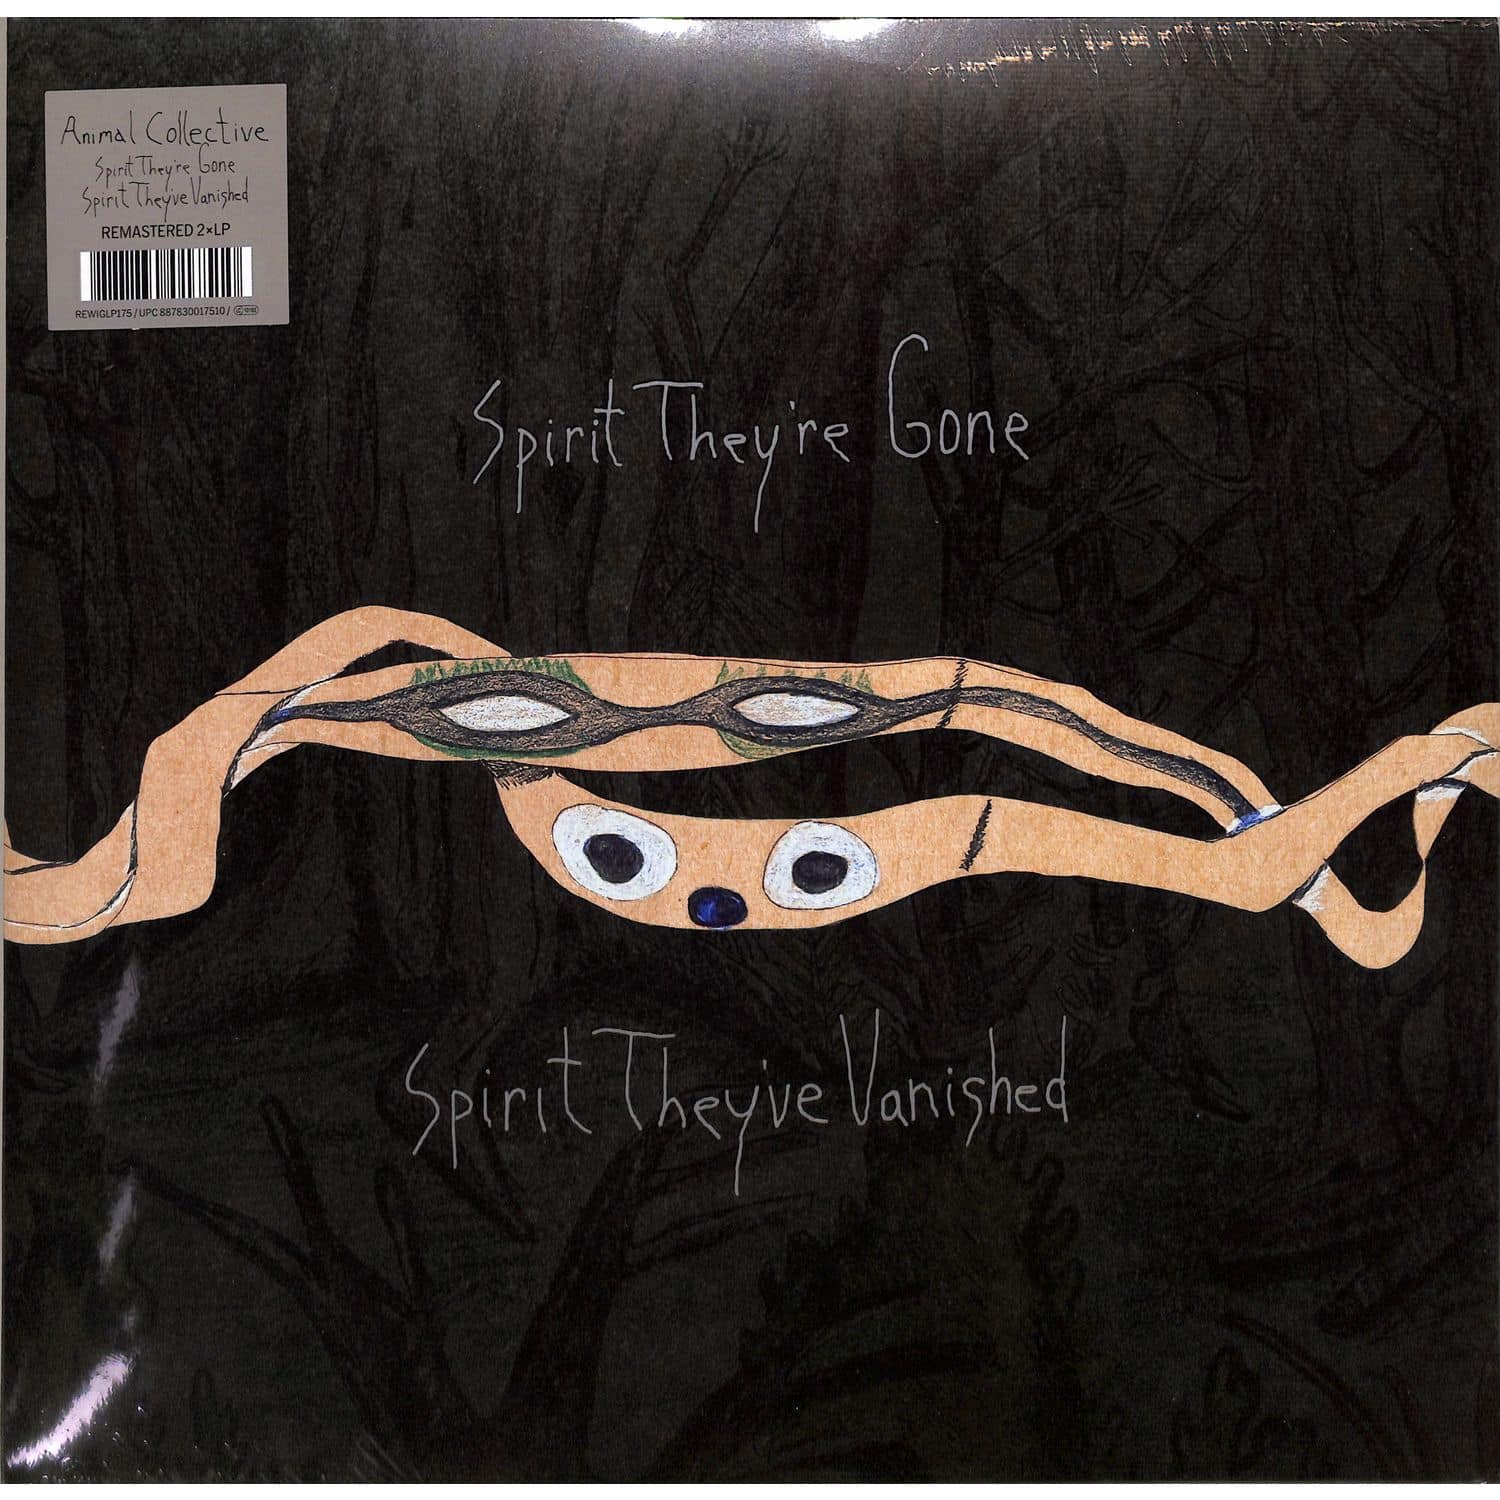 Animal Collective - SPIRIT THEY RE GONE, SPIRIT THEY VE VANISHED 